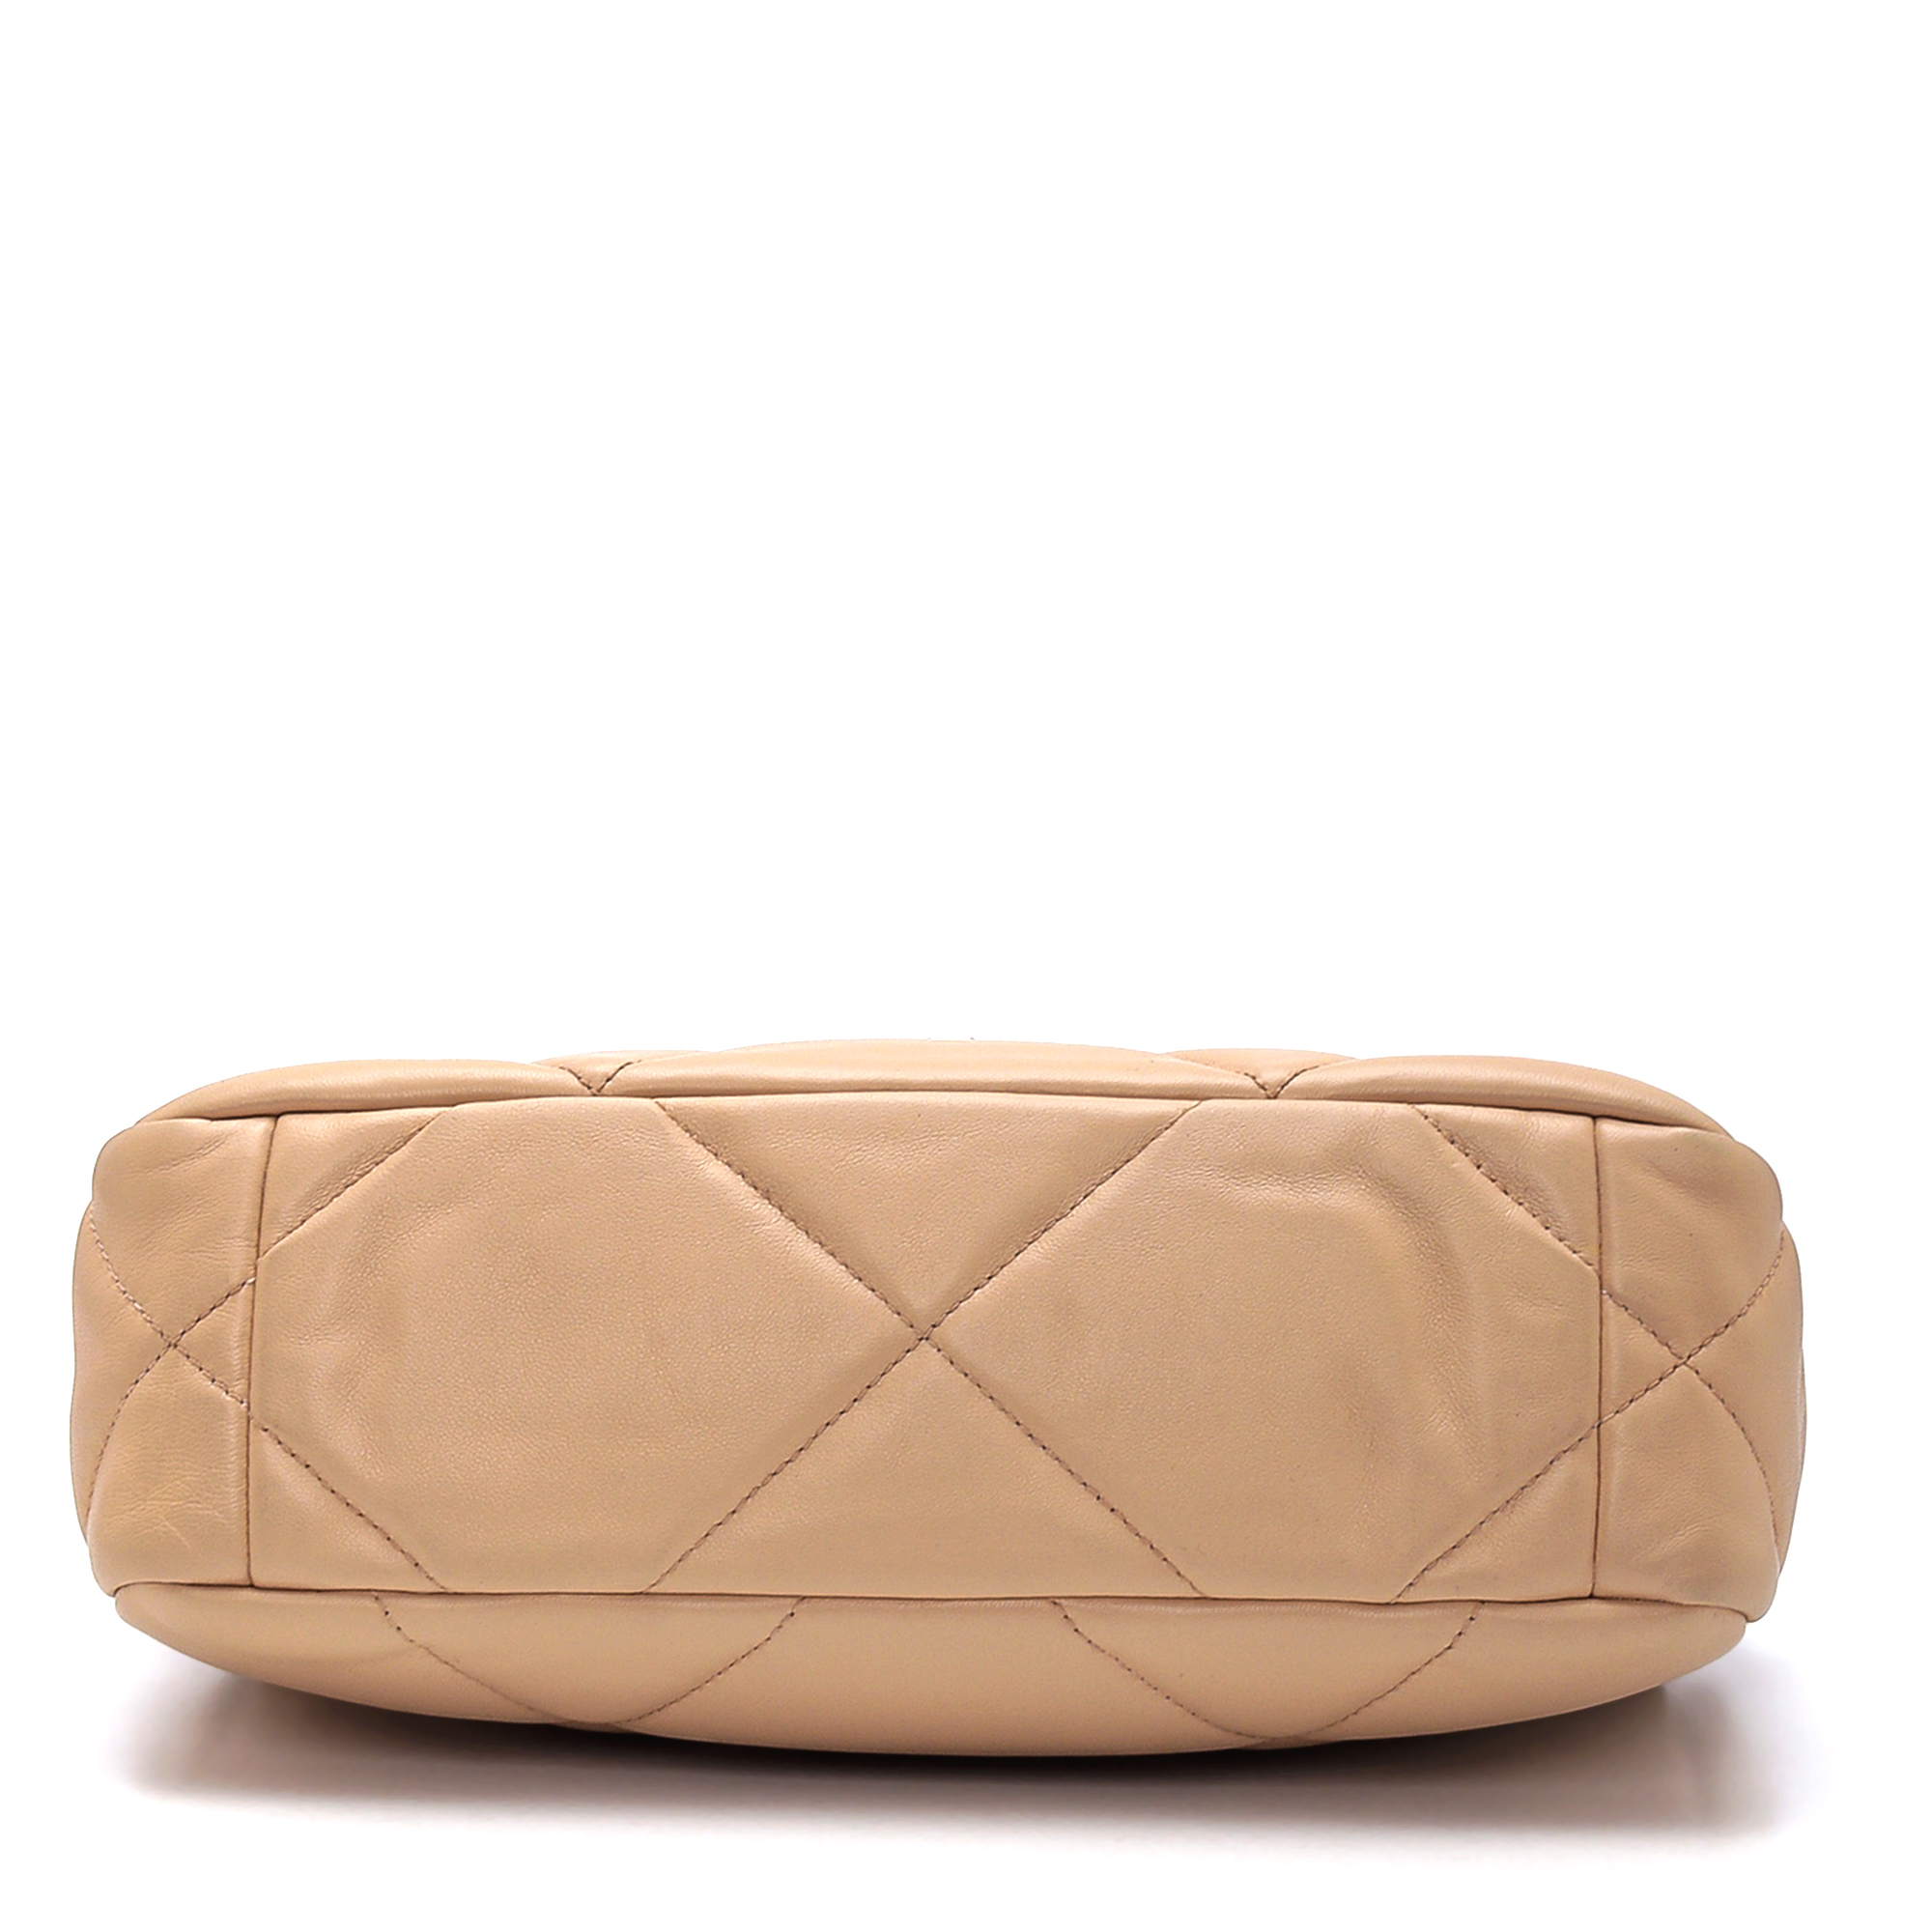 Chanel - Beige Quilted Lambskin Leather Medium No19 Bag